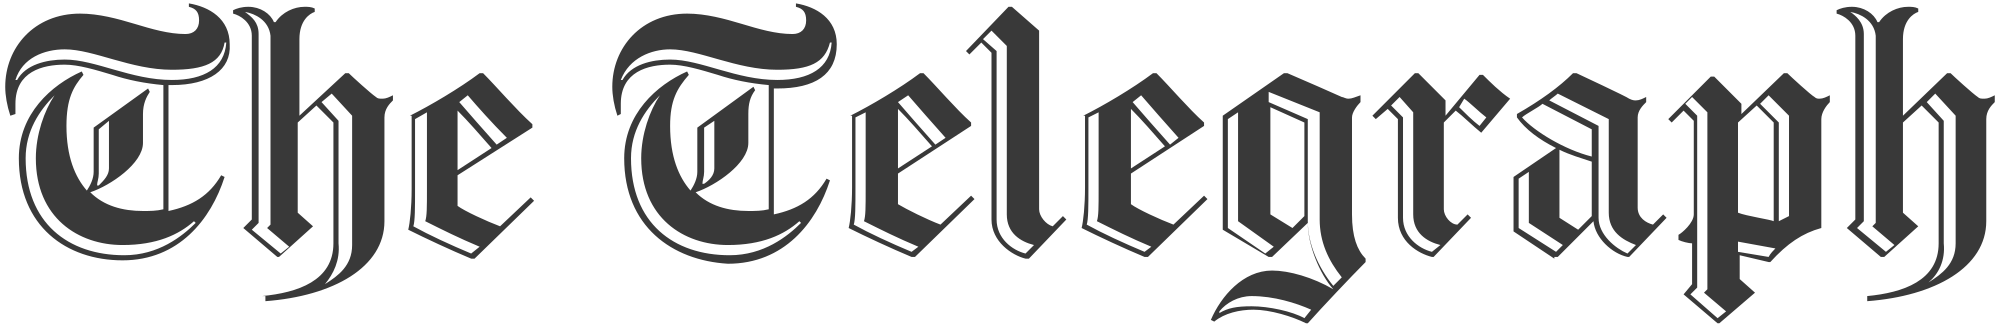 2000px-The_Telegraph_logo.svg.png